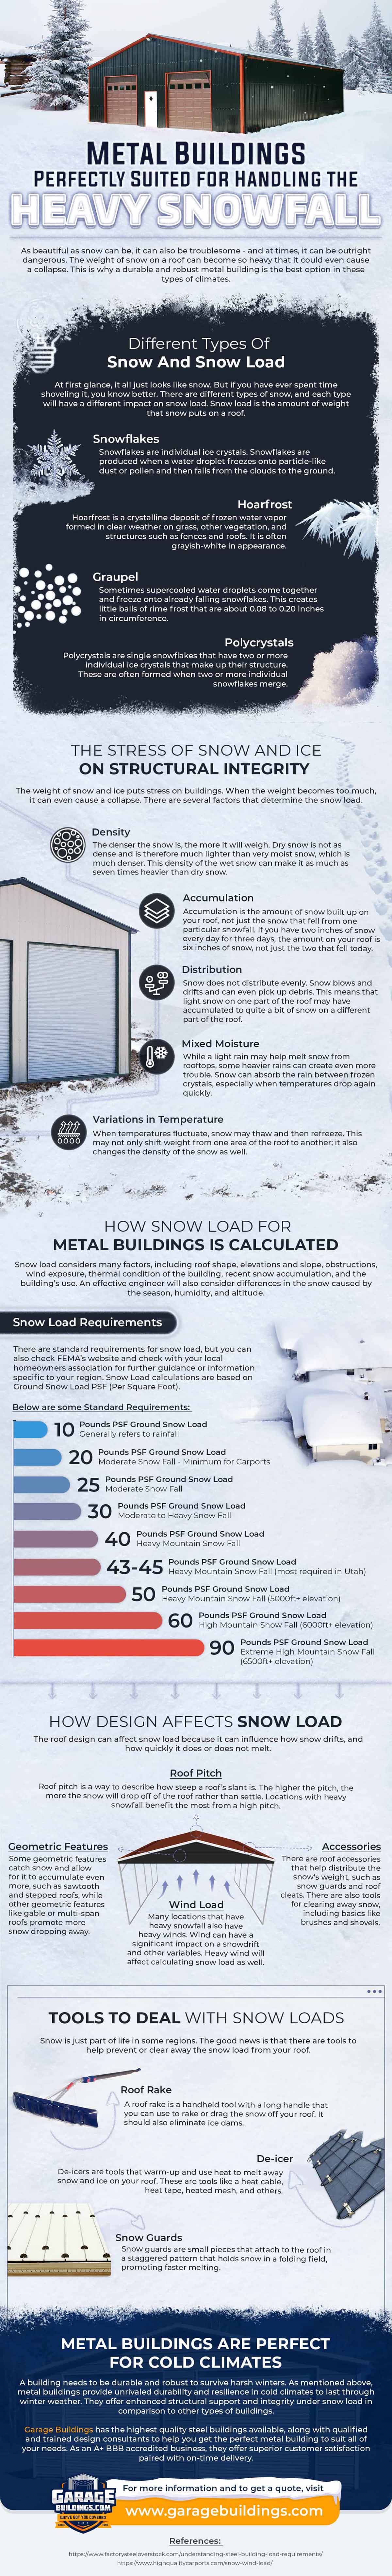 Metal Buildings - Perfectly Suited for Handling the Heavy Snowfall